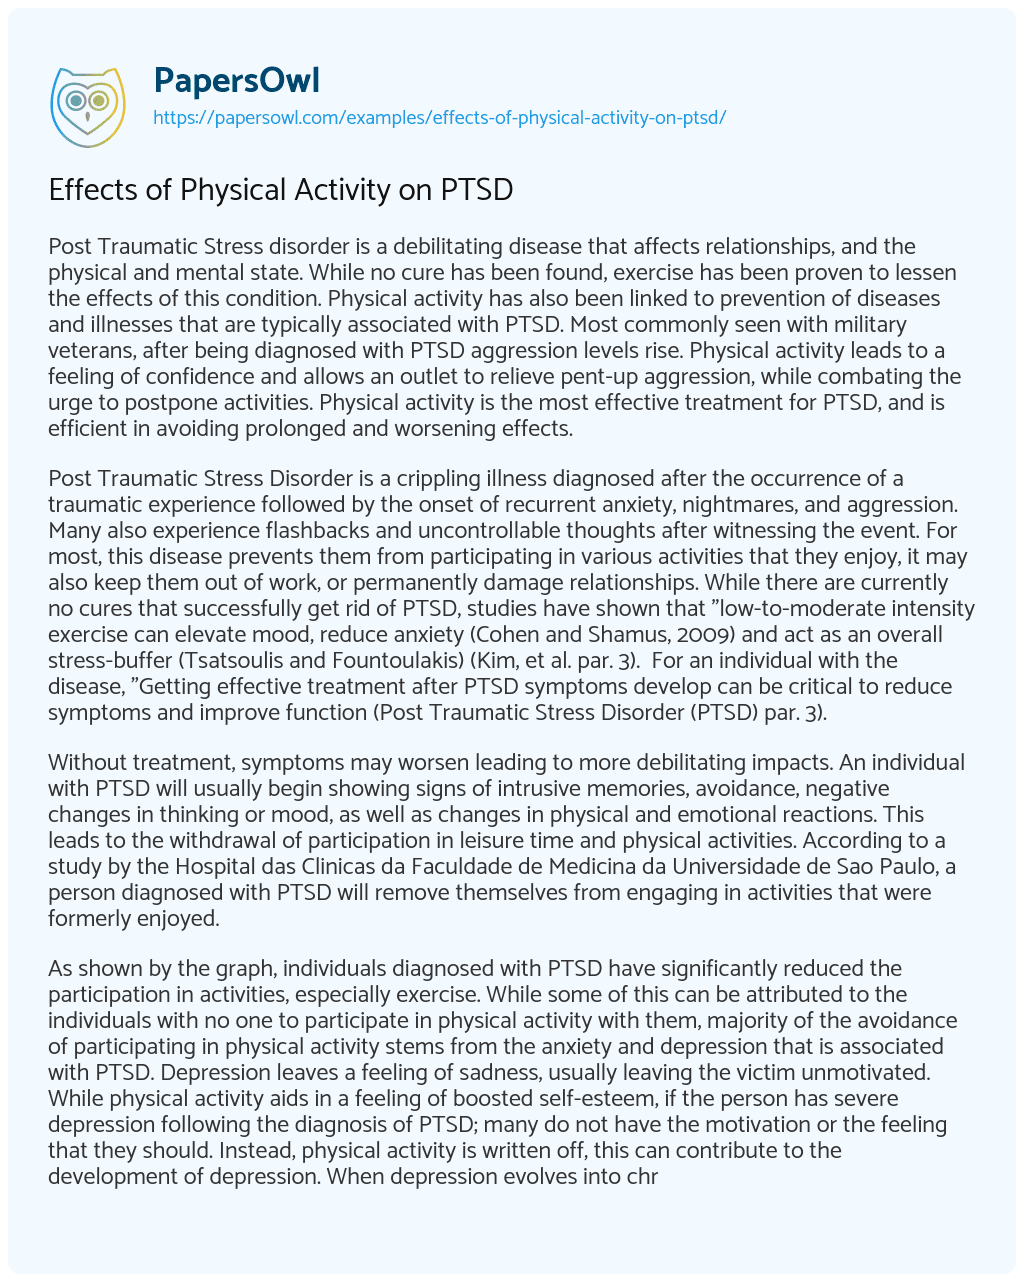 Essay on Effects of Physical Activity on PTSD